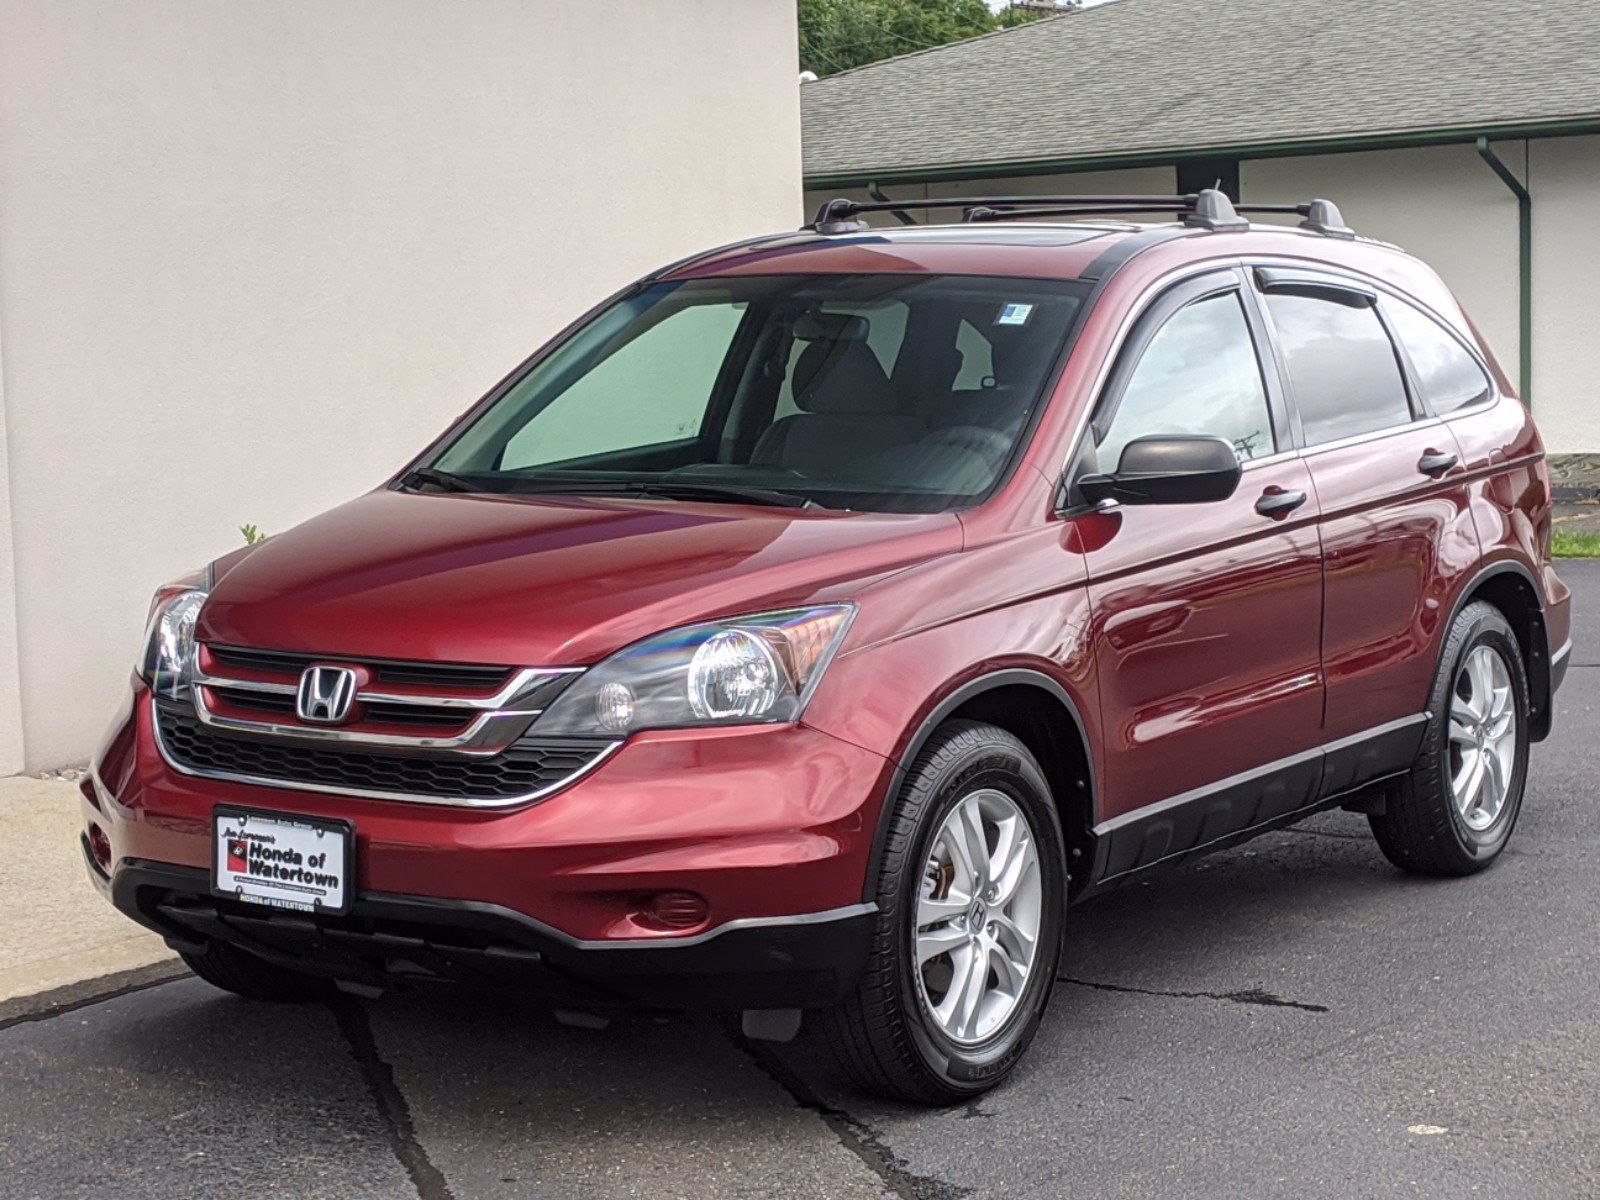 Pre-Owned 2010 Honda CR-V EX Sport Utility in Westbrook #24466A 2010 Honda Cr V 4wd Towing Capacity